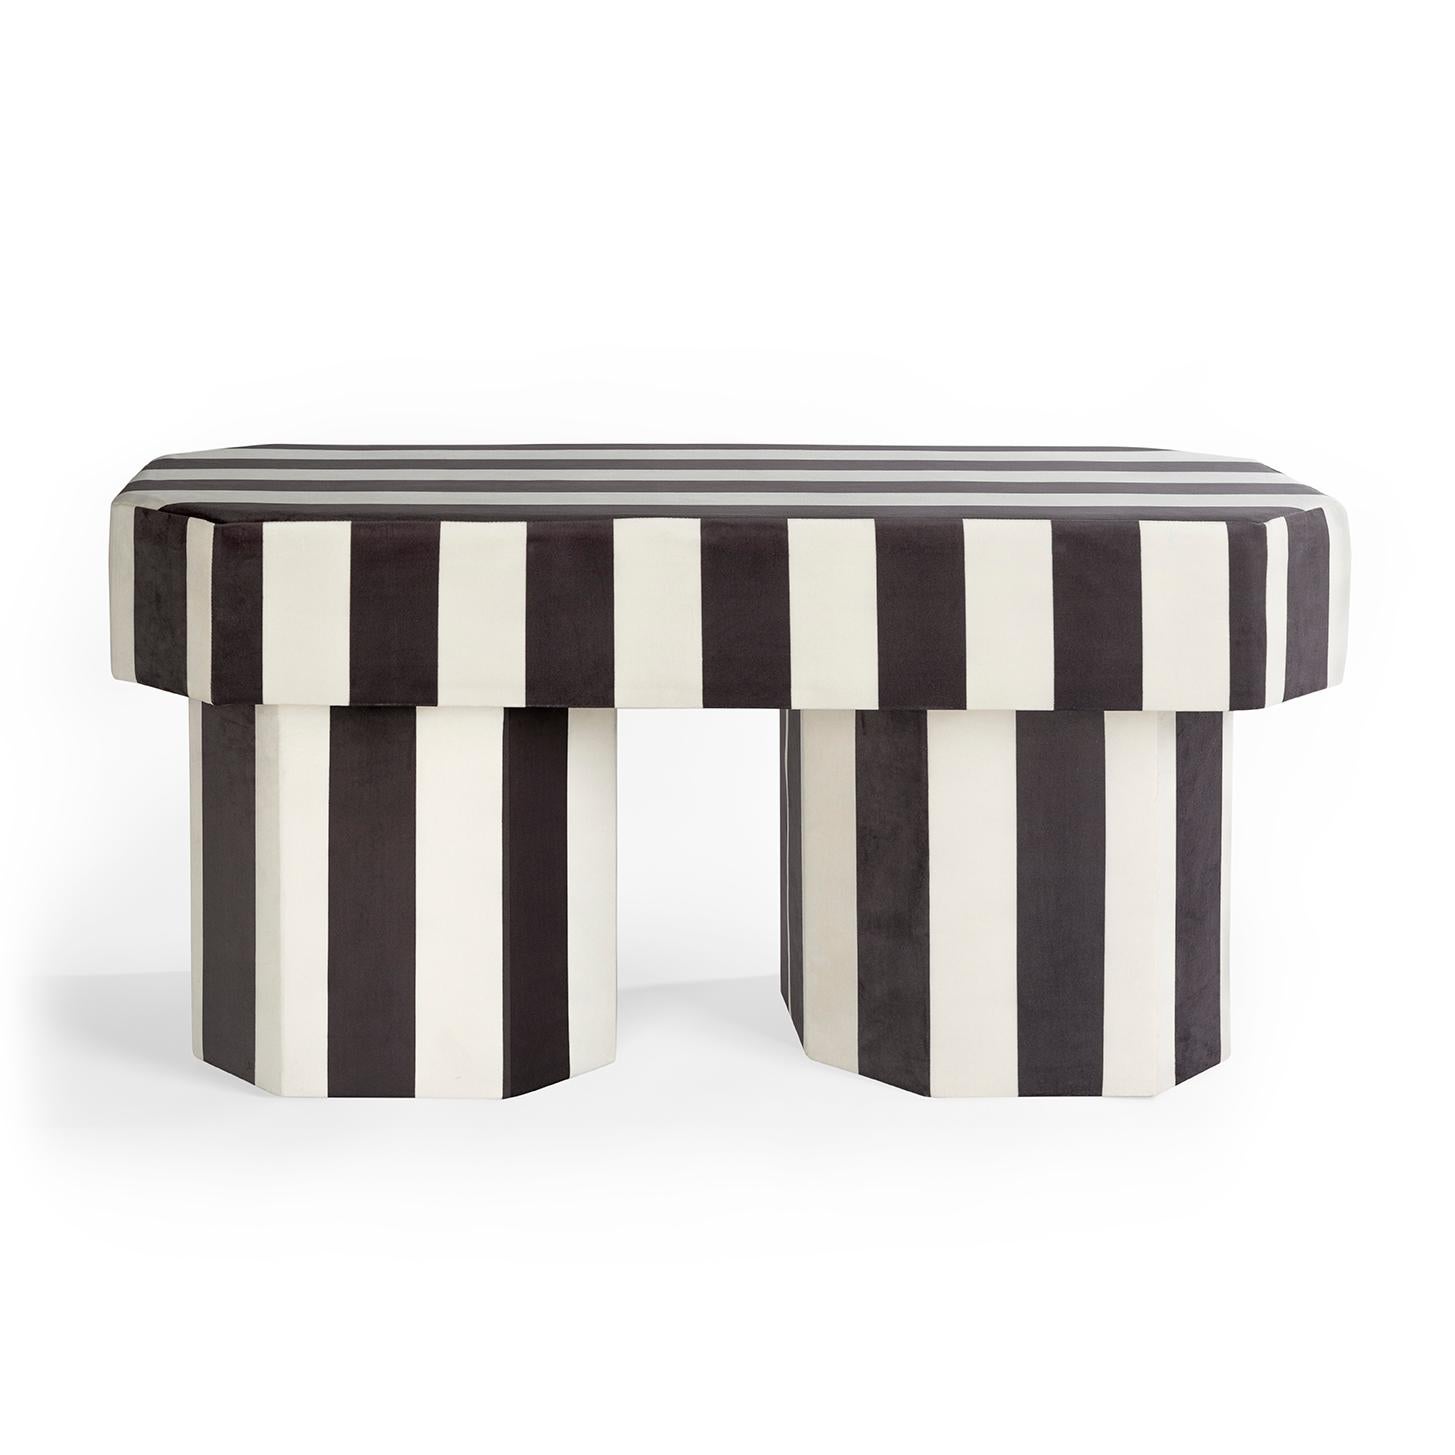 Viva Stripe Black and White Bench by Houtique
Dimensions: D 100 x W 45 x H 48 cm
Materials: Velvet, Upholstery, Wood
Also available in different colours. Please contact us.

VIVA BENCH.
Designed by Carolina Mico. Made in Spain.
Upholstered bench in